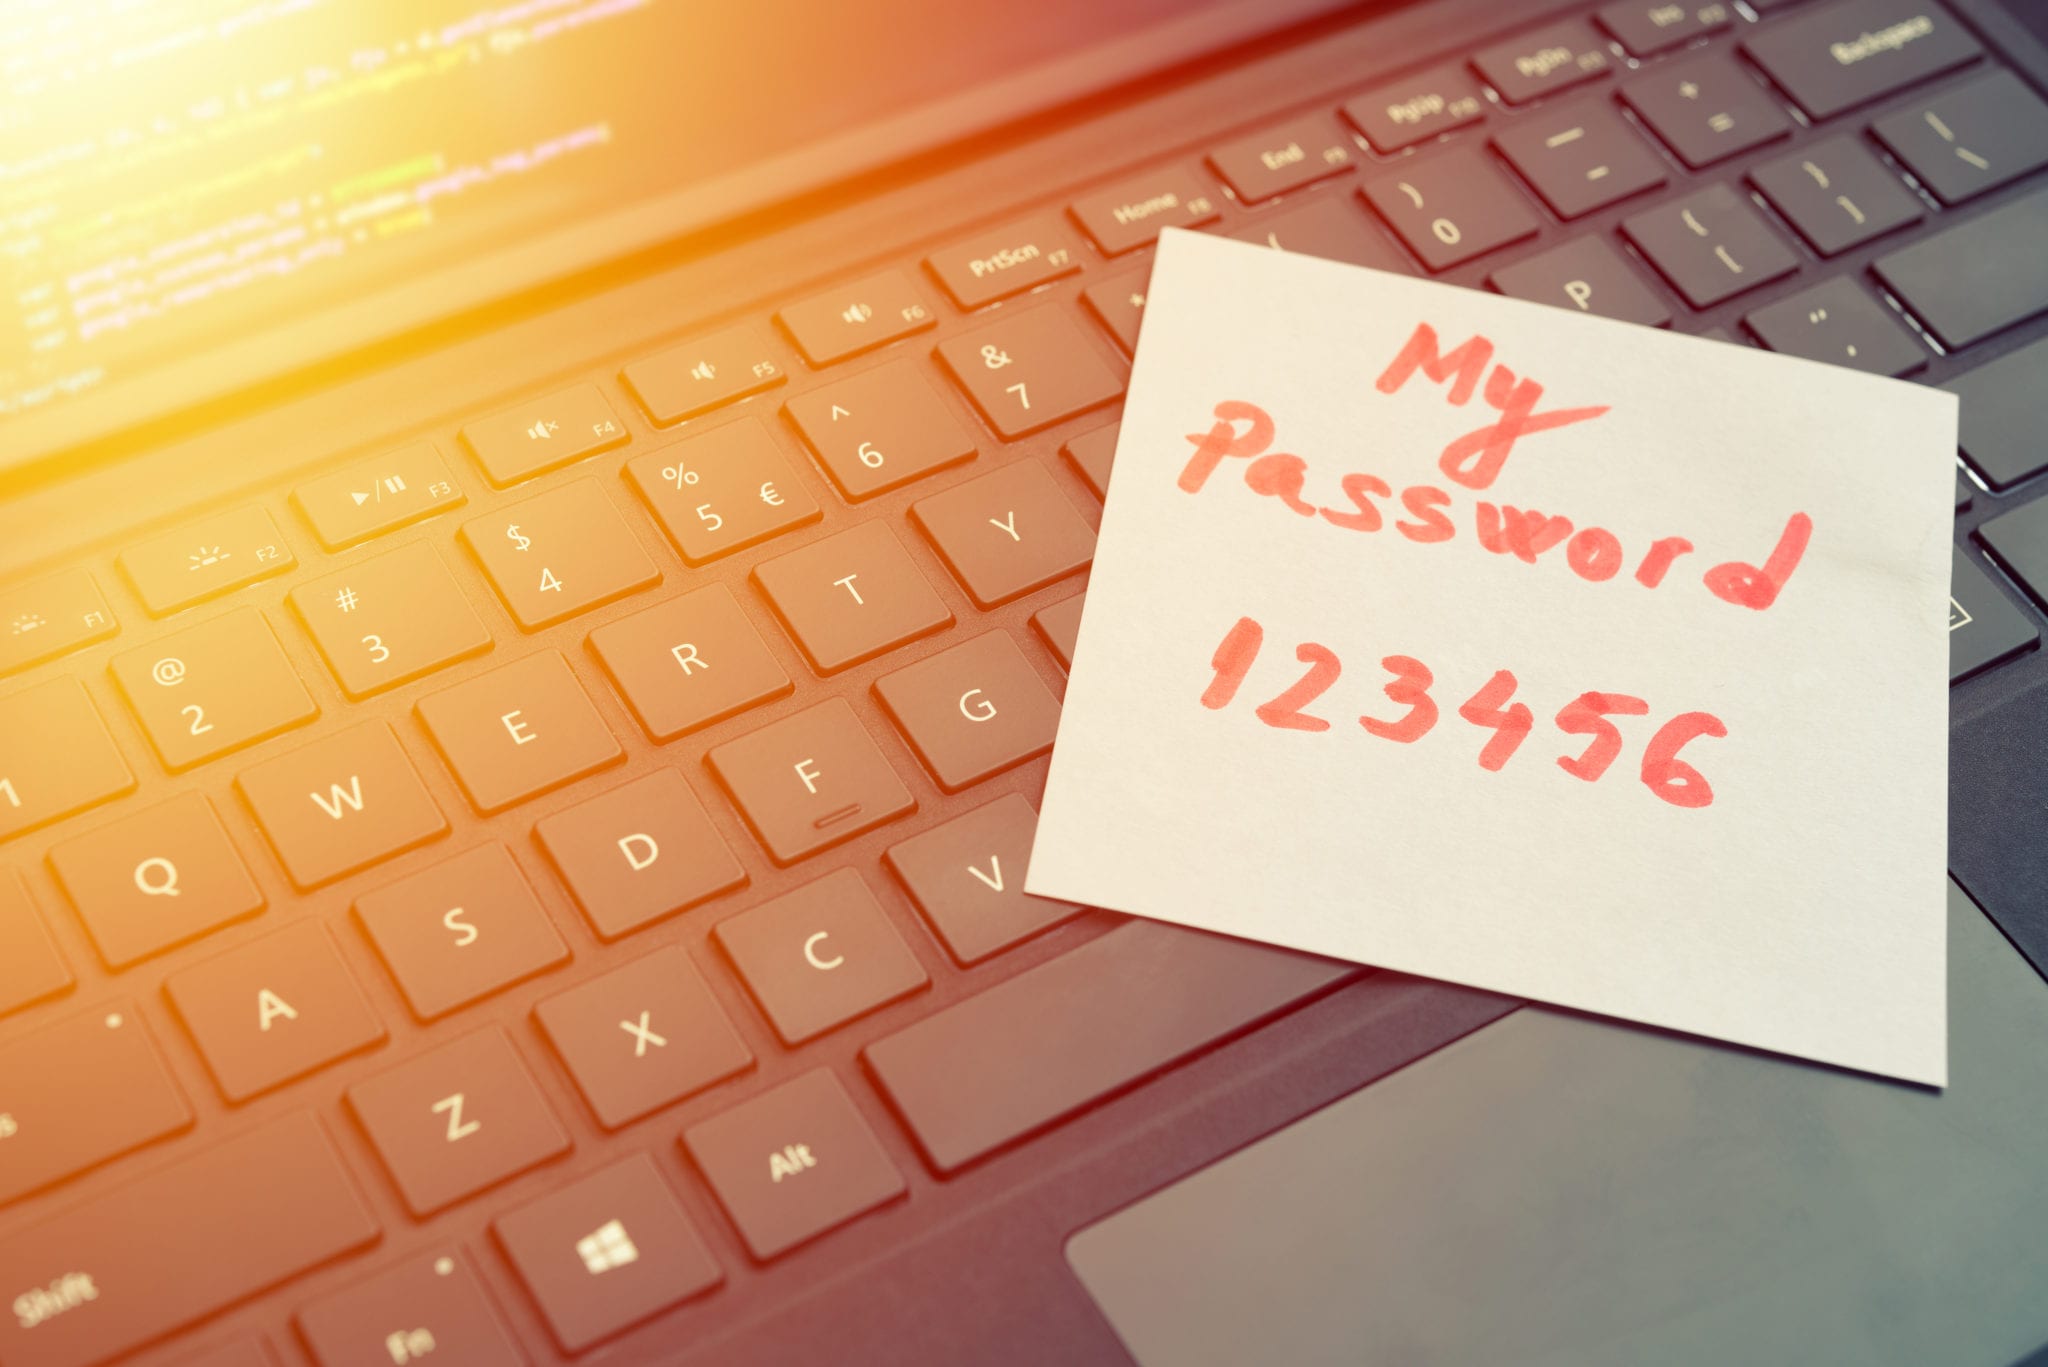 How Did You Celebrate National Password Day? Interfocus